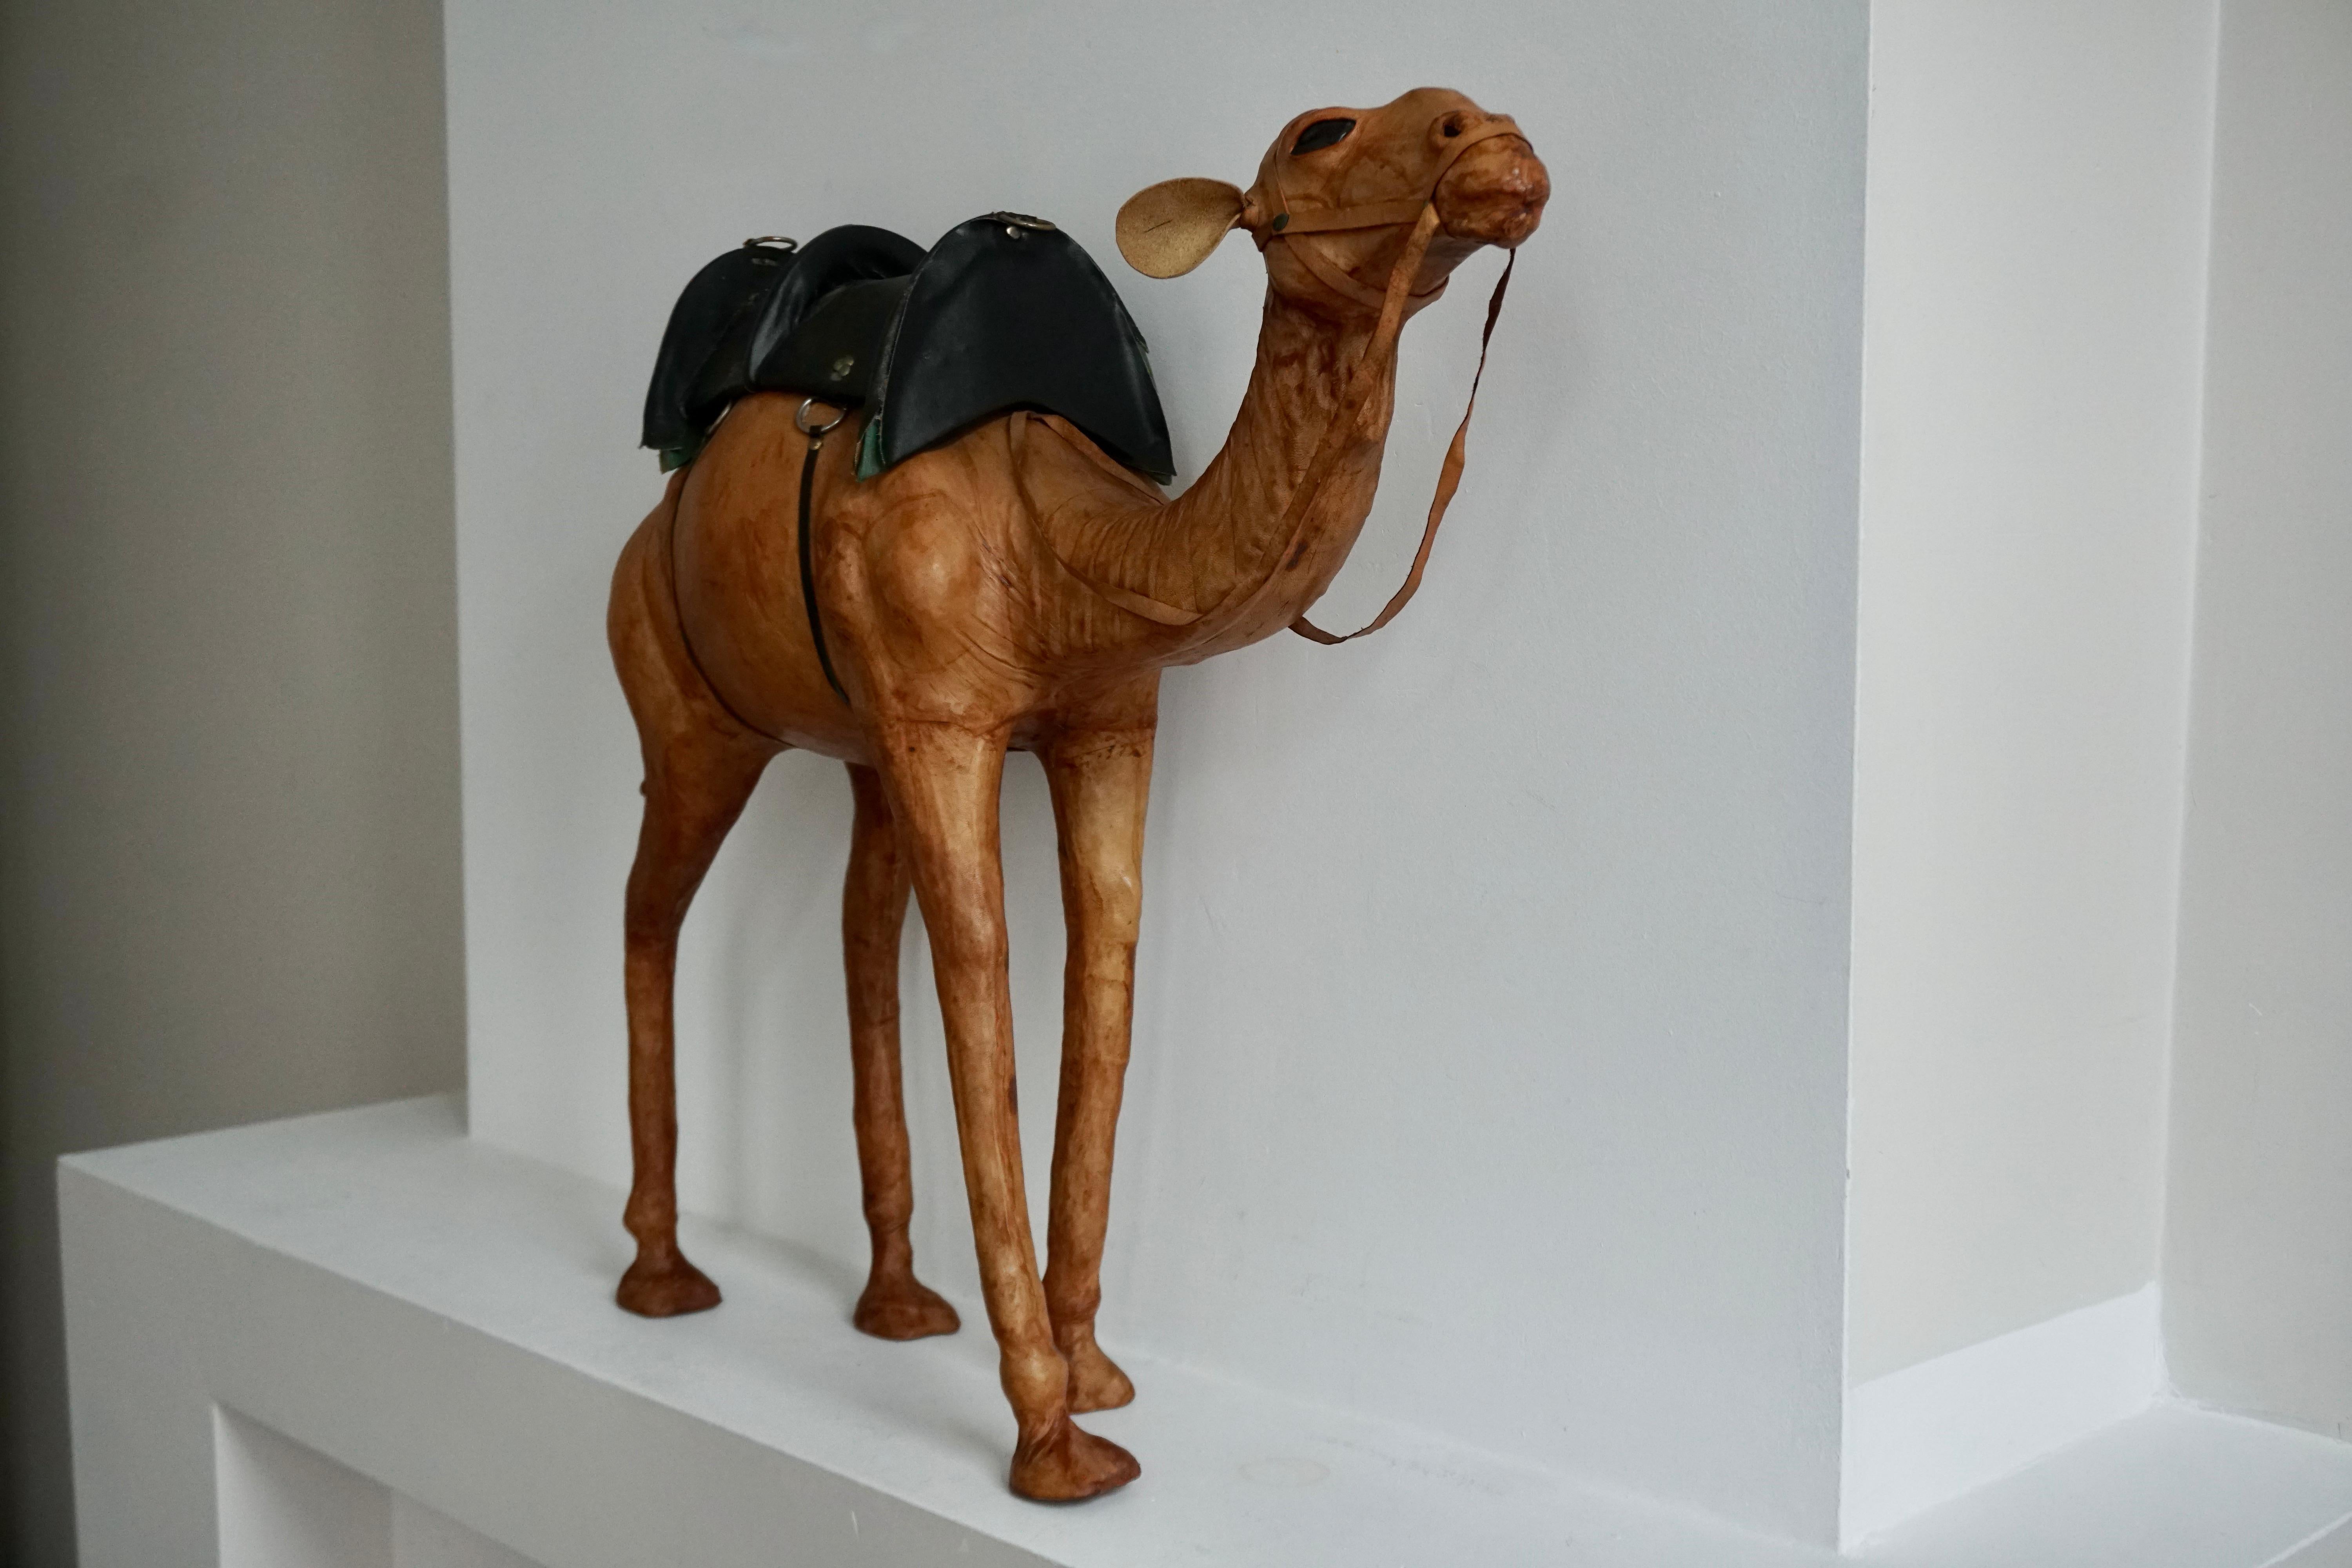 Good size and highly decorative camel or dromedary sculpture with saddle, mid-20th century. 

This full-grown and very realistic dromedary has both great aesthetic and decorative value. Underneath the leather hide is a very well carved wooden